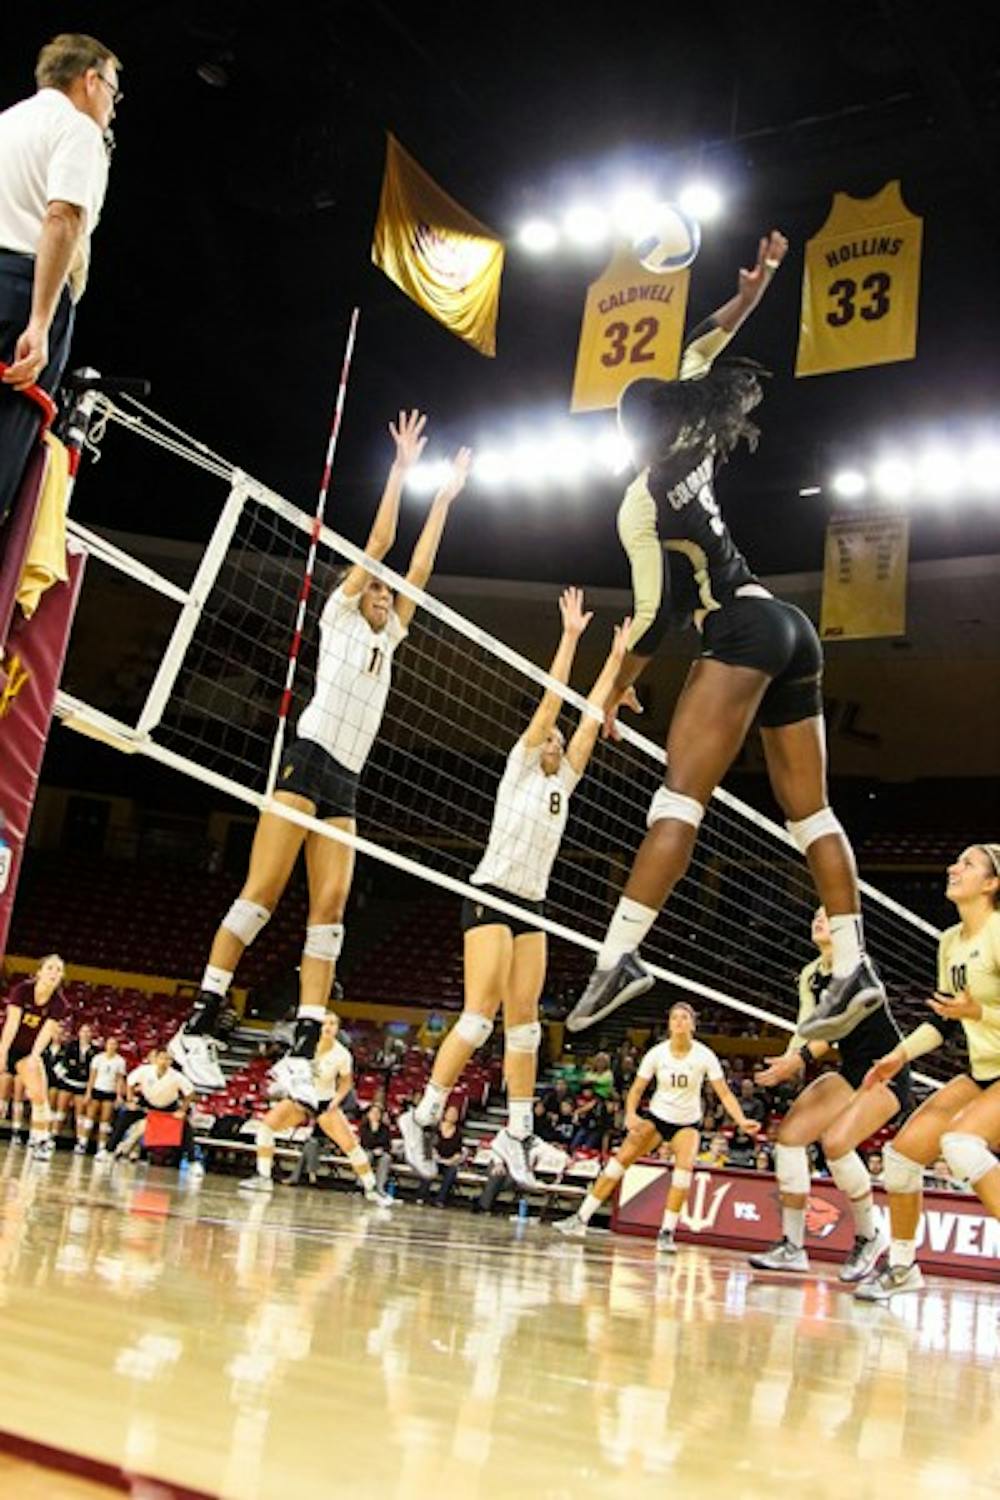 Sophomore outside hitter BreElle Bailey and junior middle blocker Whitney Follette go up for a block during the second set of the game against Colorado on November 2nd, 2014. The Sun Devils' late comeback attempt came up short vs the Buffs as they lost 3-2. (Photo by Daniel Kwon)